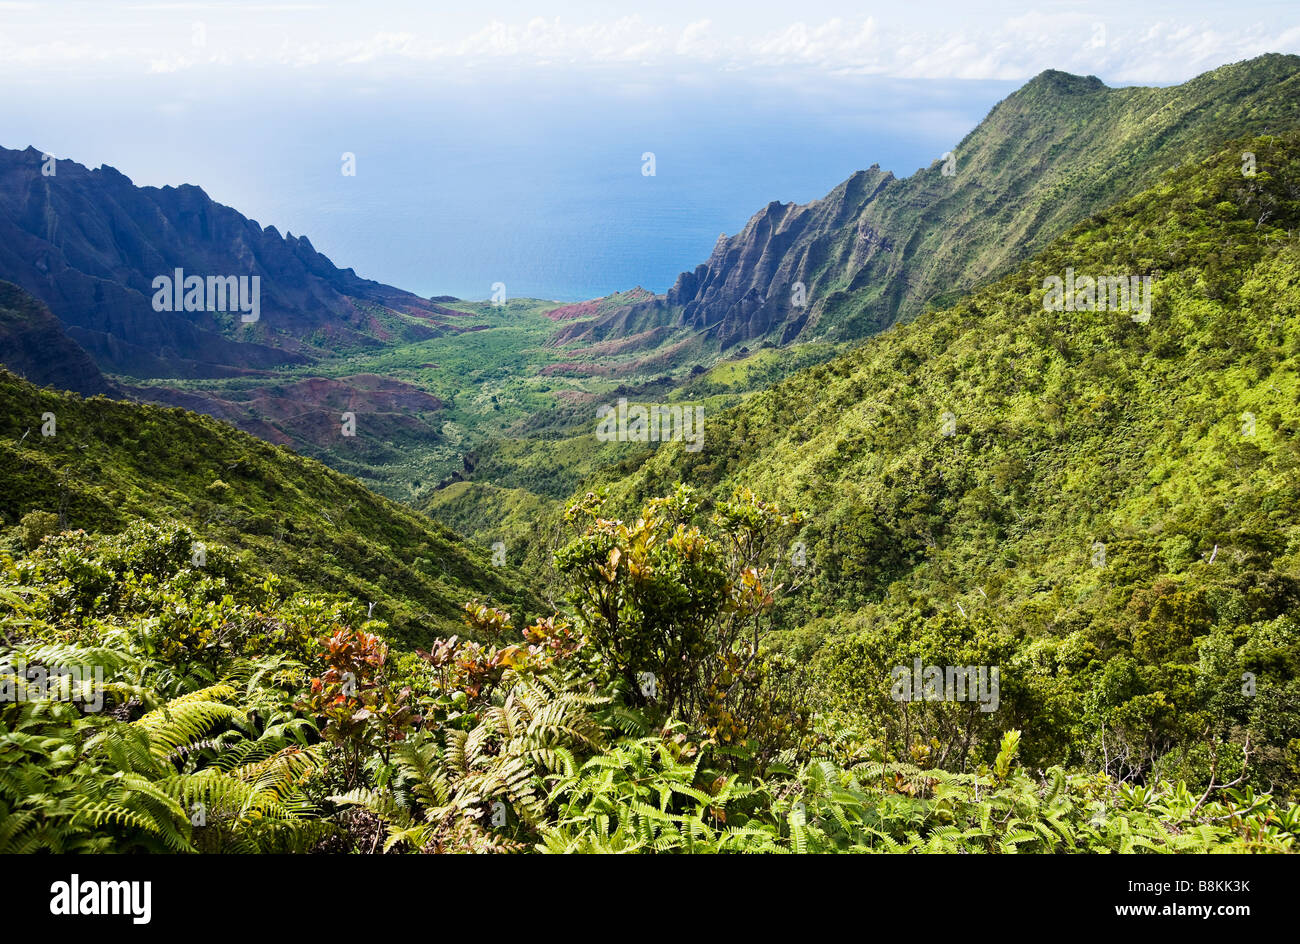 View of the Kalalau Valley and the Pacific ocean from Kokee State Park Kauai Hawaii USA Stock Photo